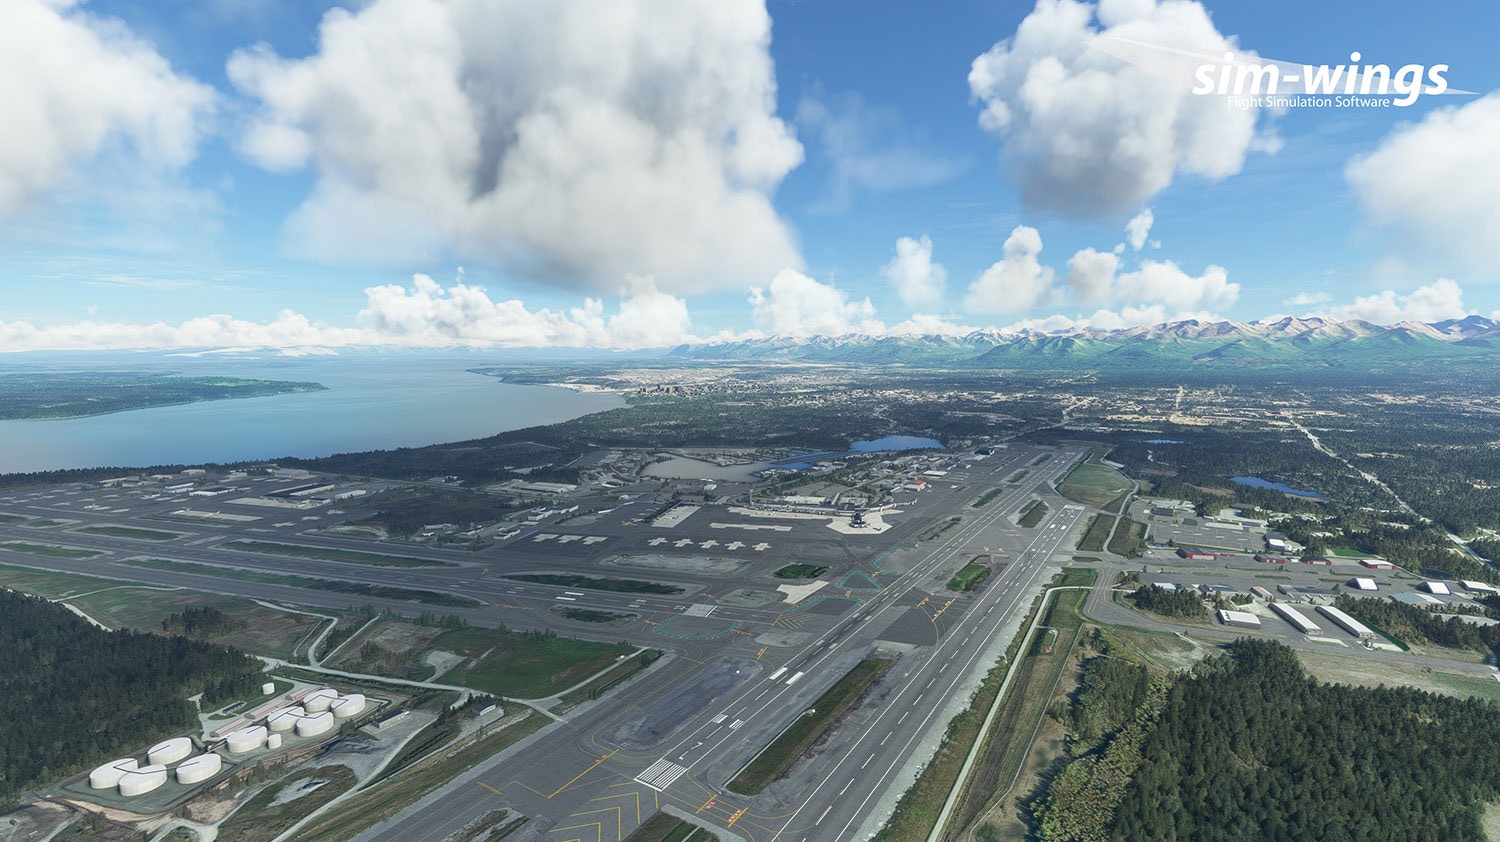 Sim-Wings Releases Anchorage for MSFS